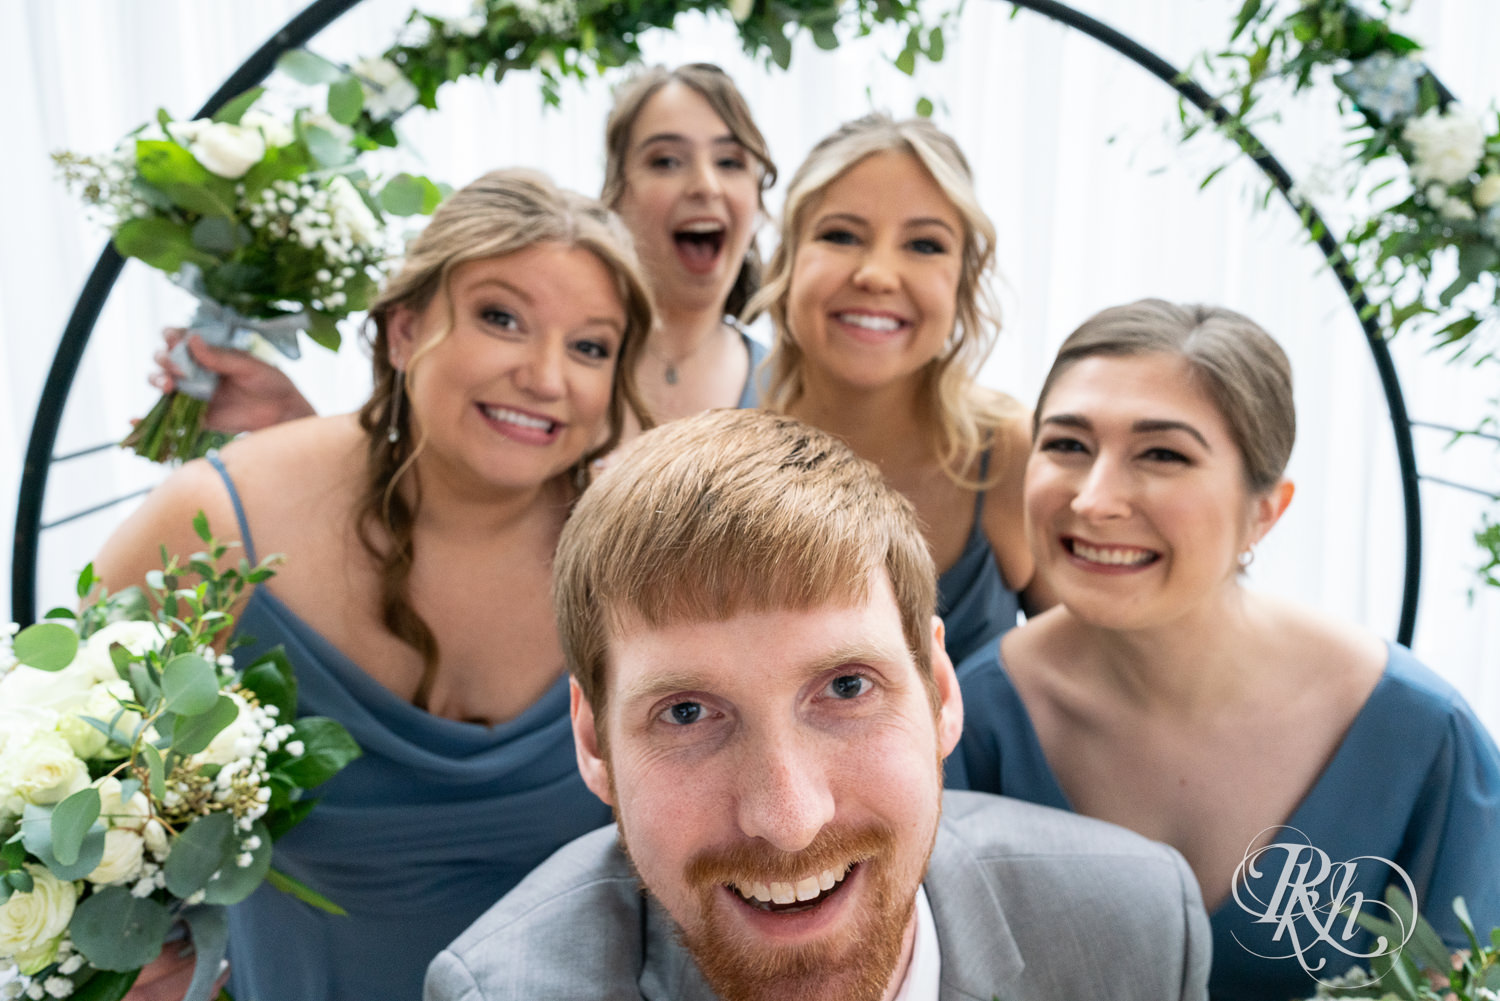 Wedding party smiles together at Doubletree Hilton Saint Paul in Saint Paul, Minnesota.